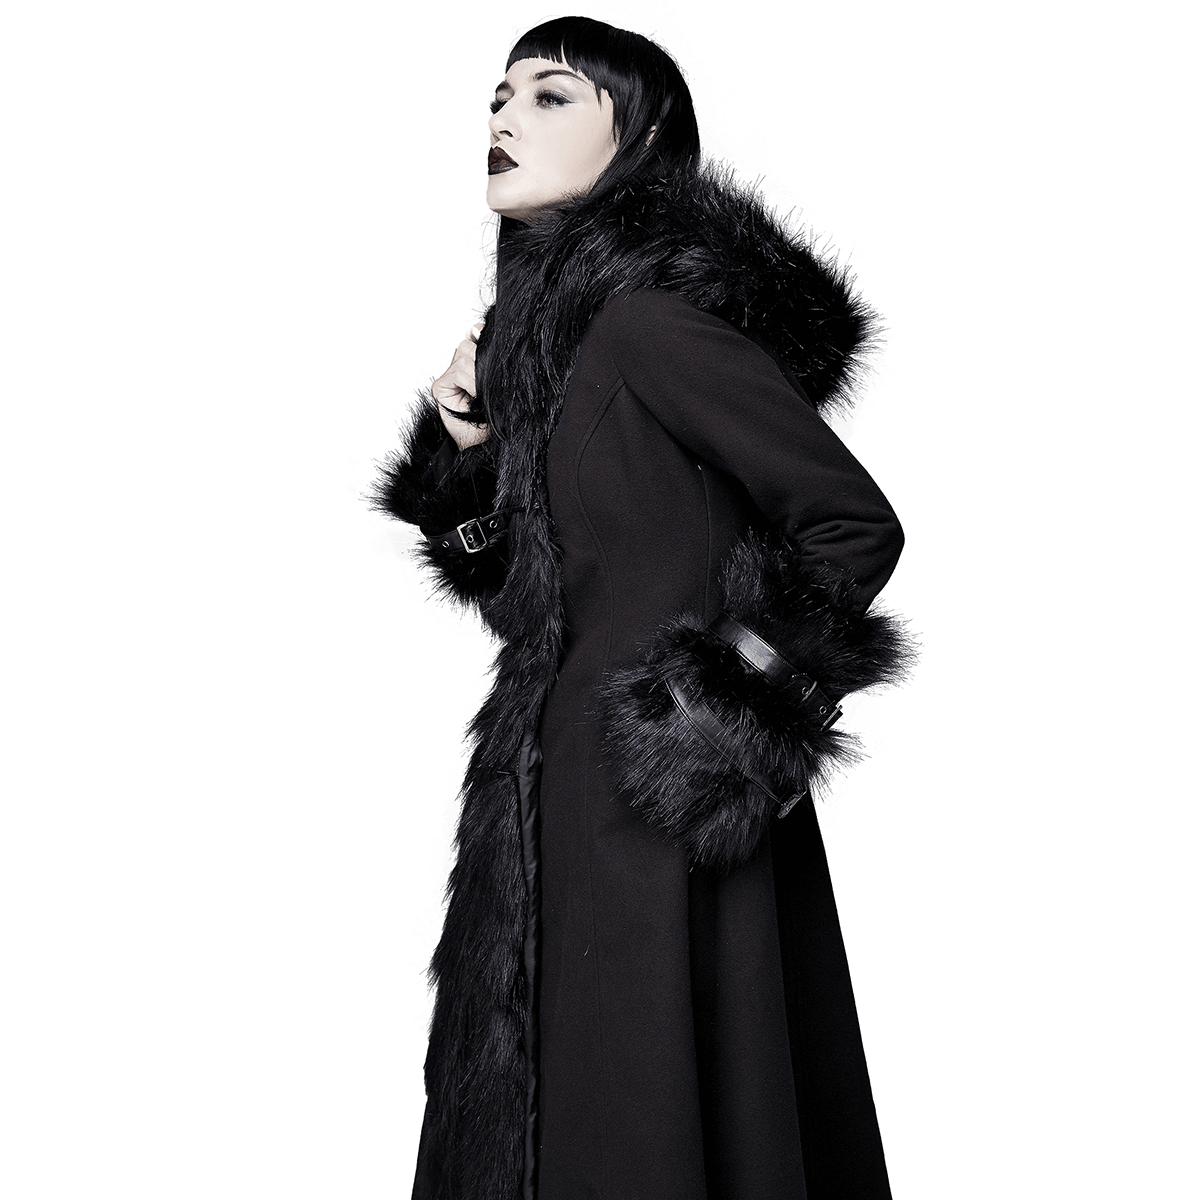 Winter is Coming Gothic Style Black Long Coat / Female Thick Alternative Clothing - HARD'N'HEAVY